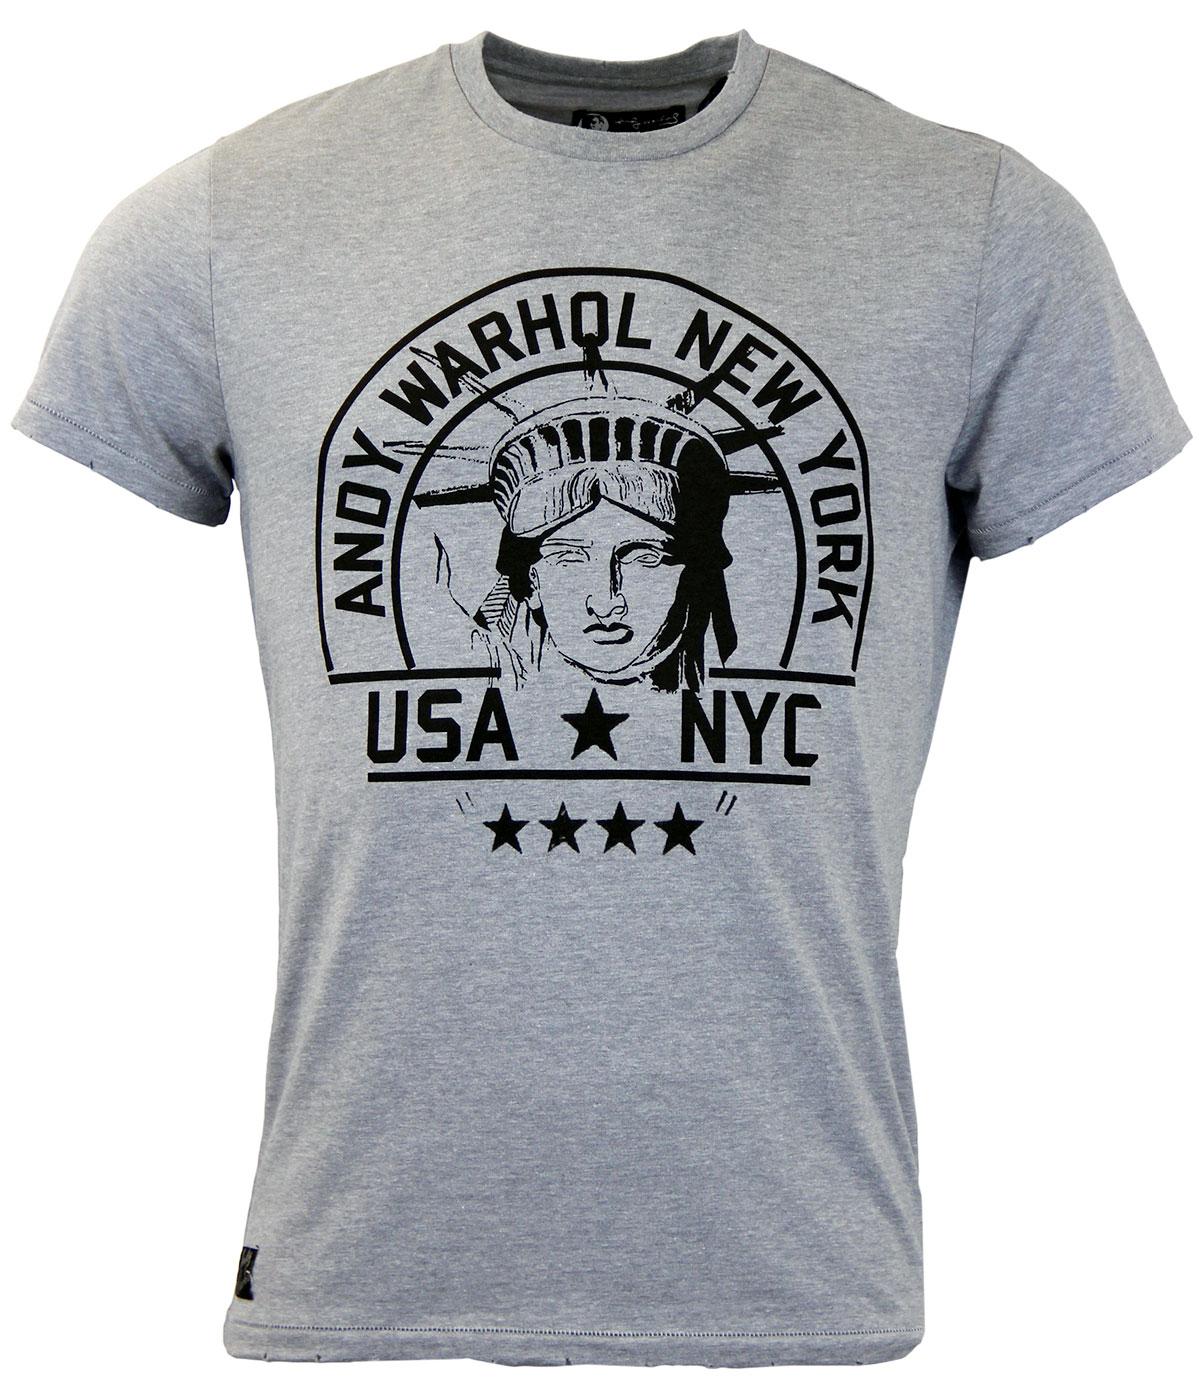 Giant ANDY WARHOL PEPE JEANS Statue of Liberty Tee